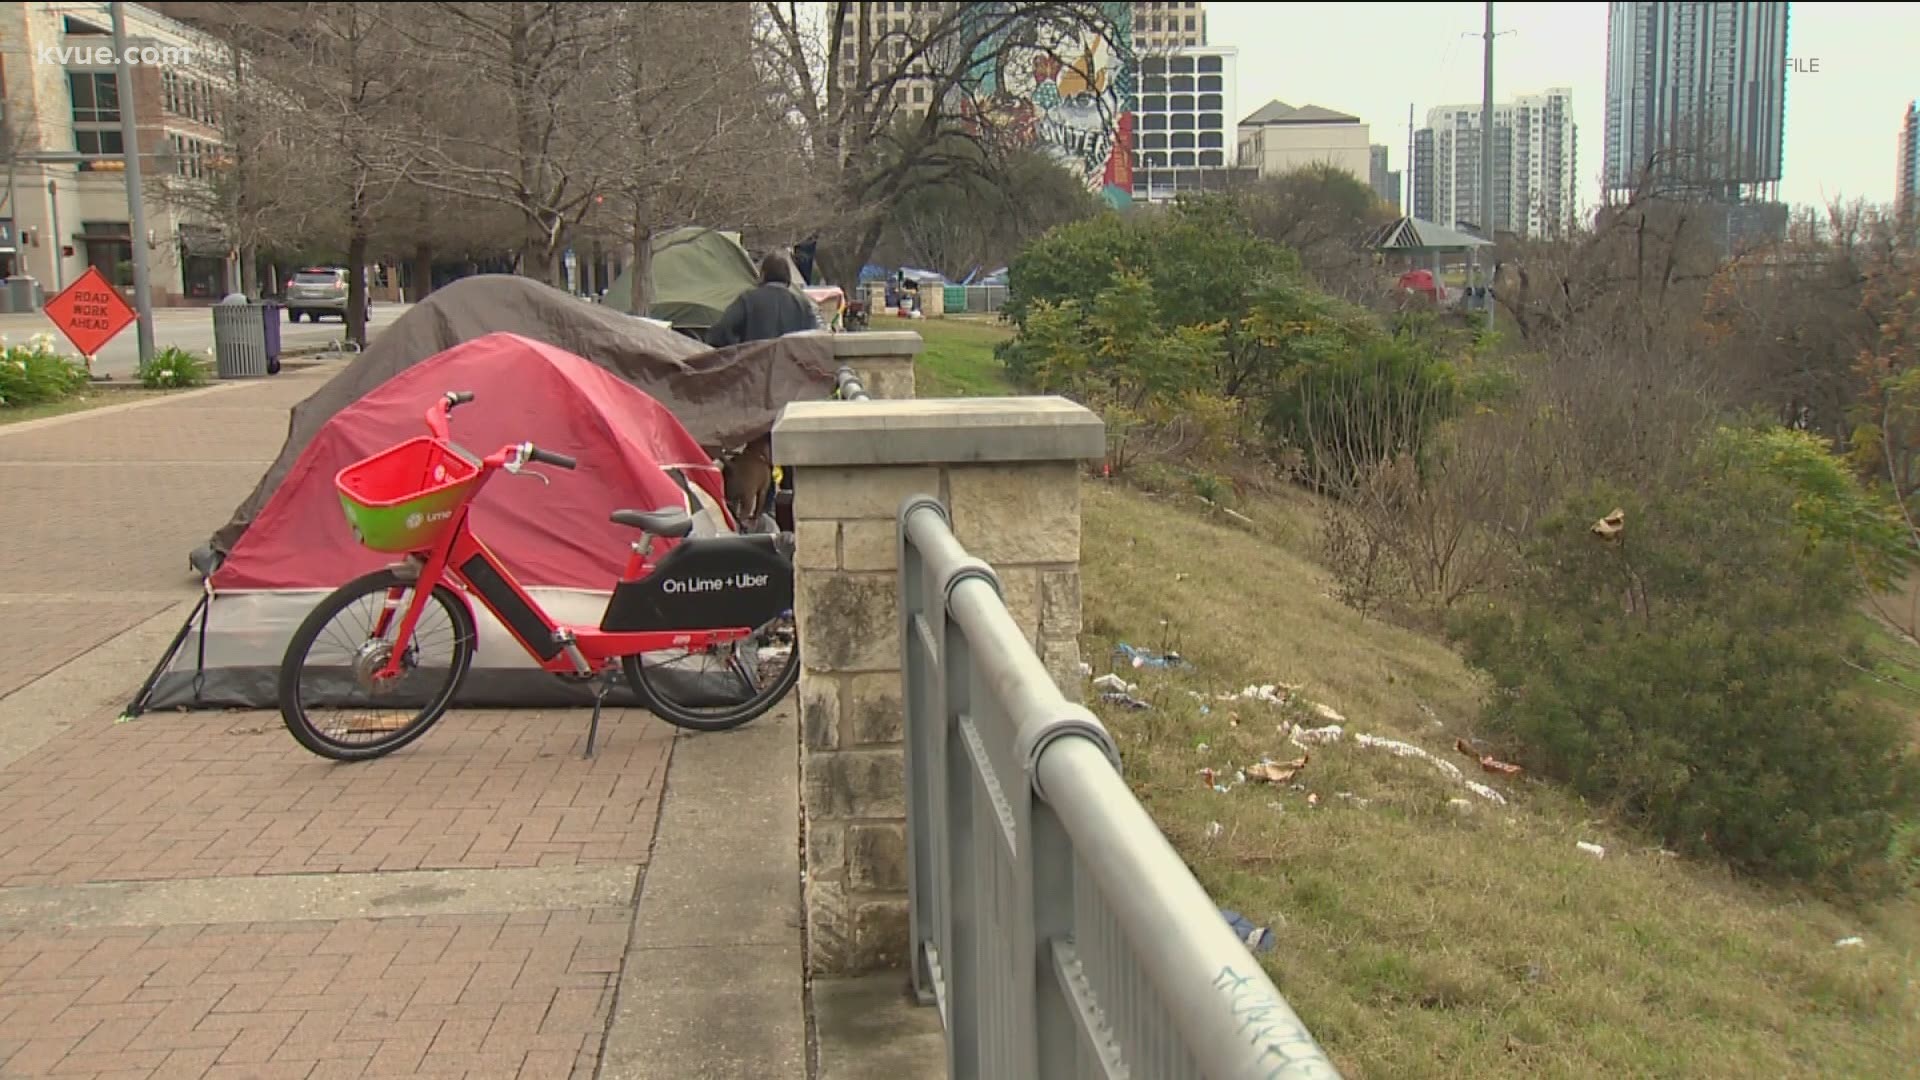 On Monday, the Austin City Council held a specially called meeting to address homelessness.